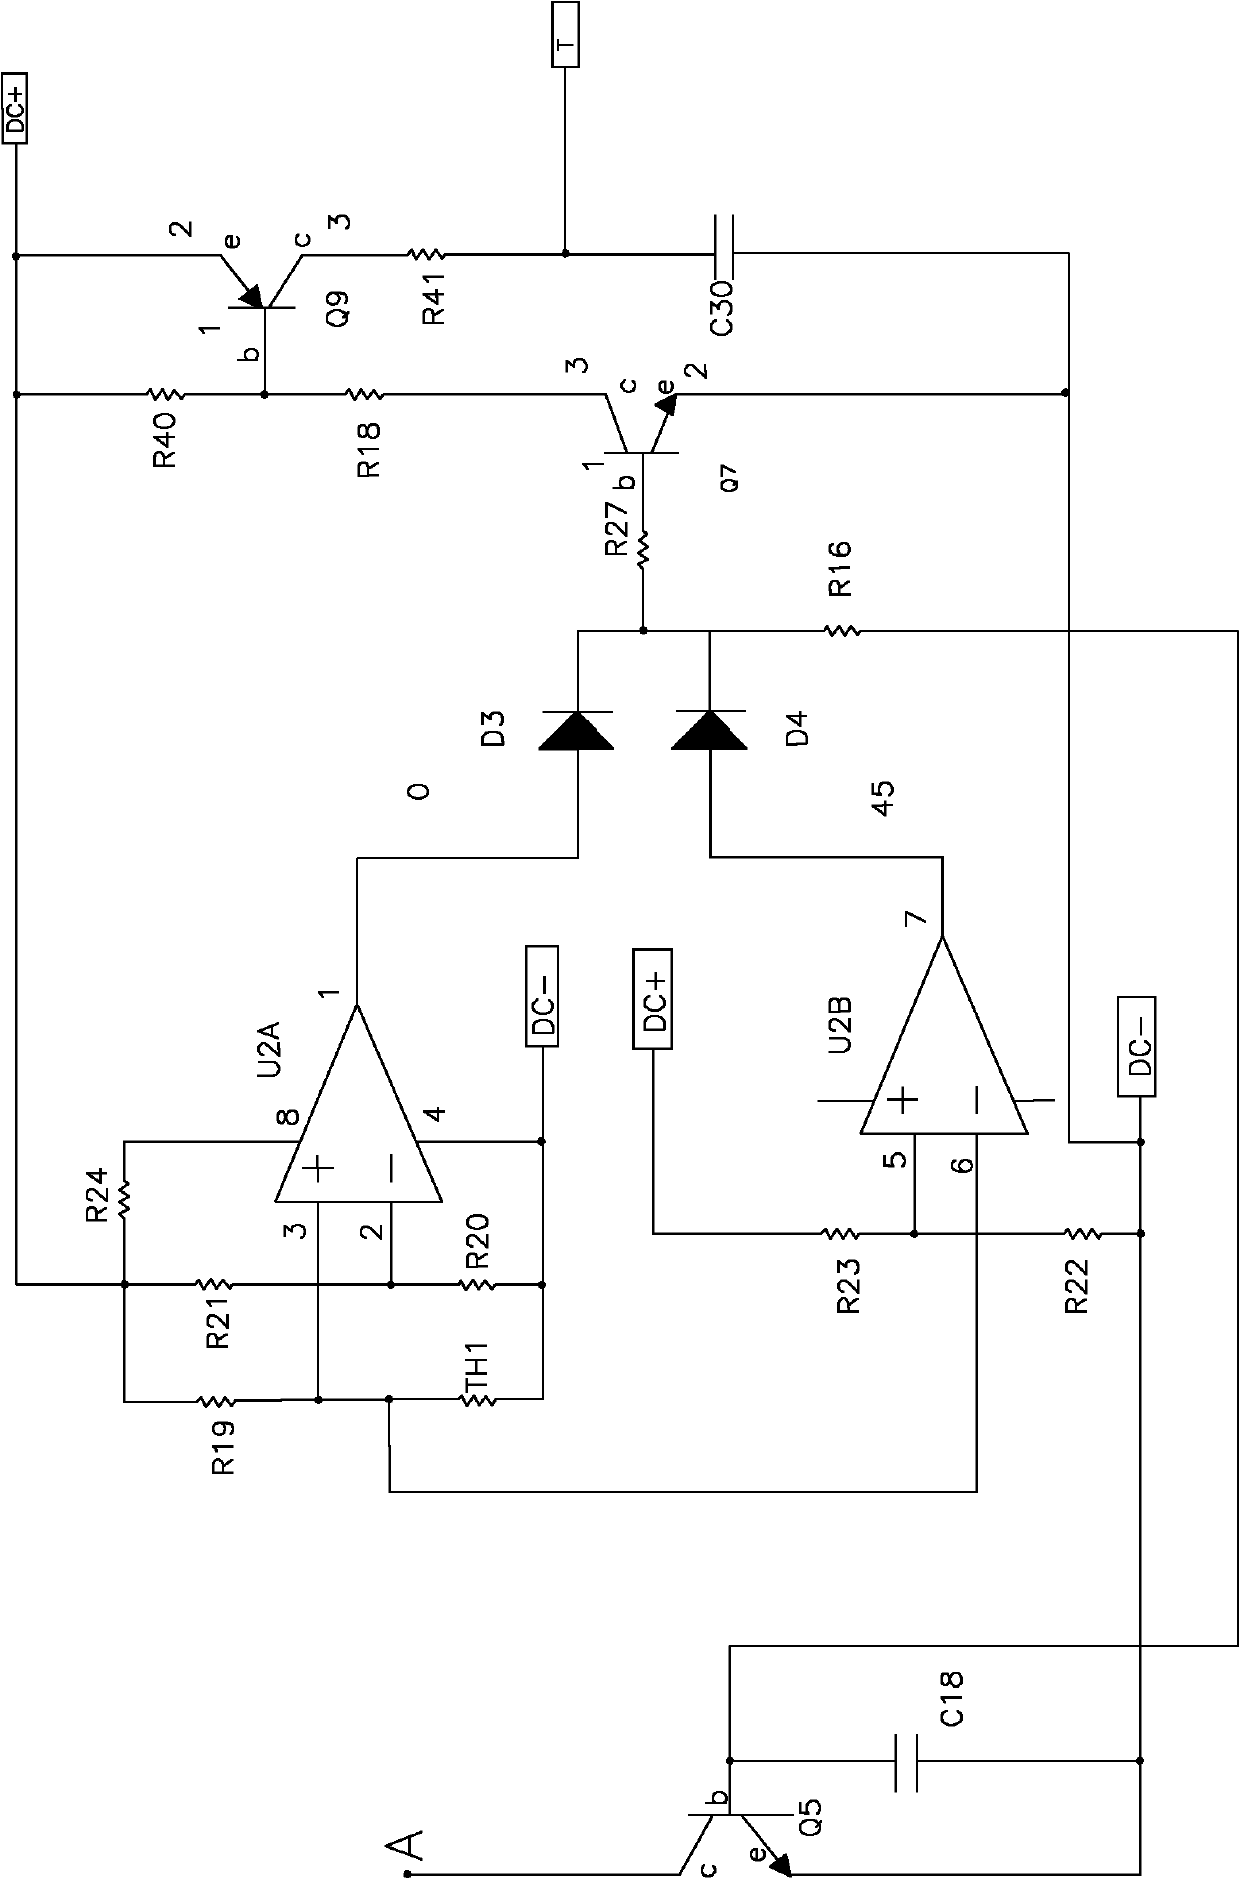 Temperature protection circuit for lithium ion battery charging and discharging